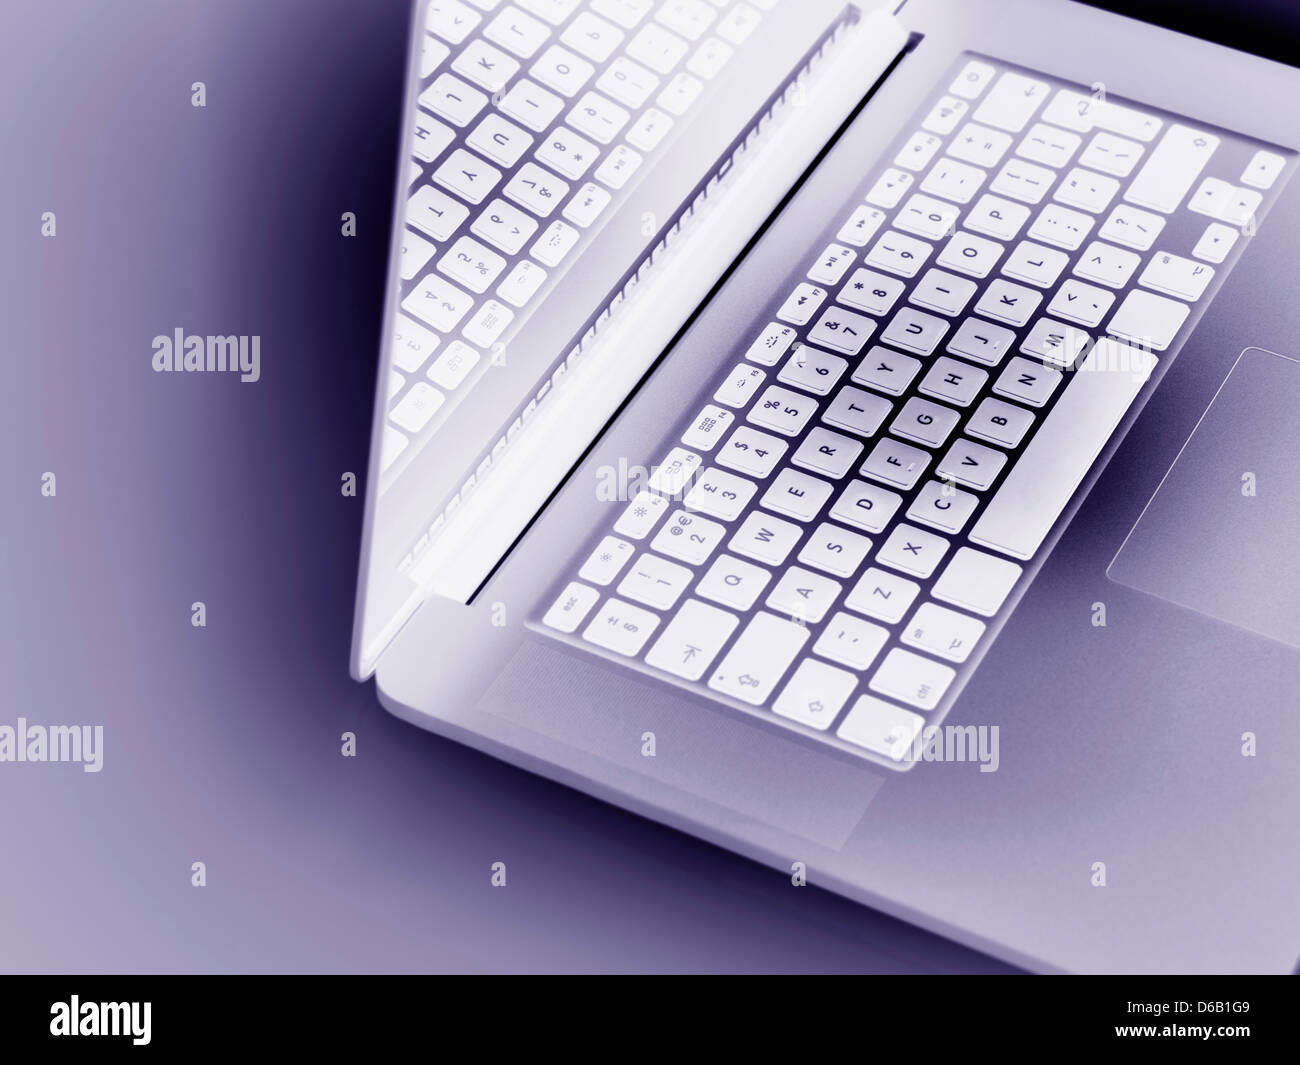 Inverted image of laptop computer Stock Photo